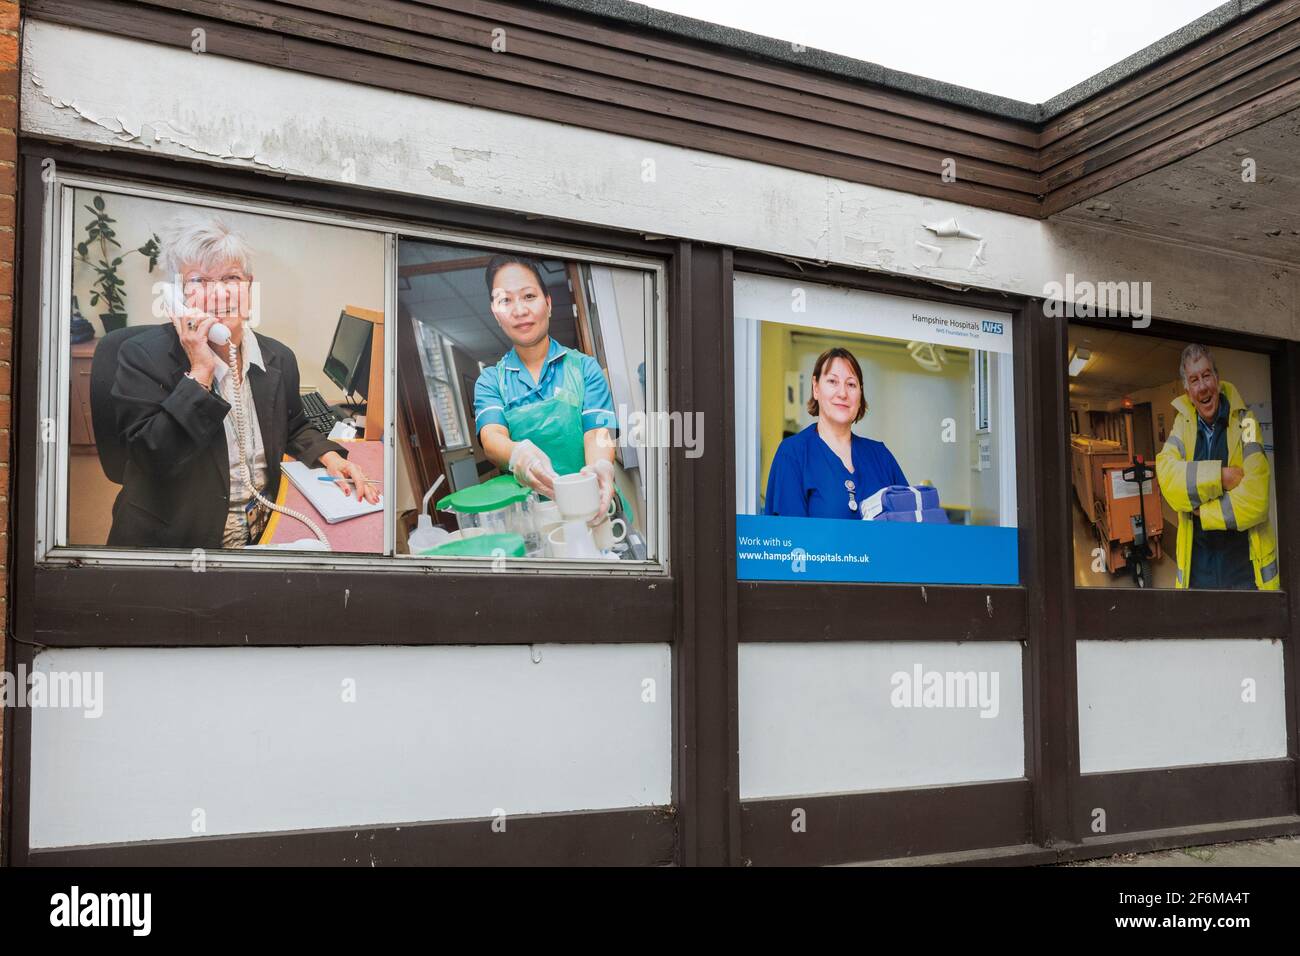 Recruitment posters for occupations in healthcare displayed on the exterior of an NHS building at Royal Hampshire County Hospital, Winchester, UK Stock Photo